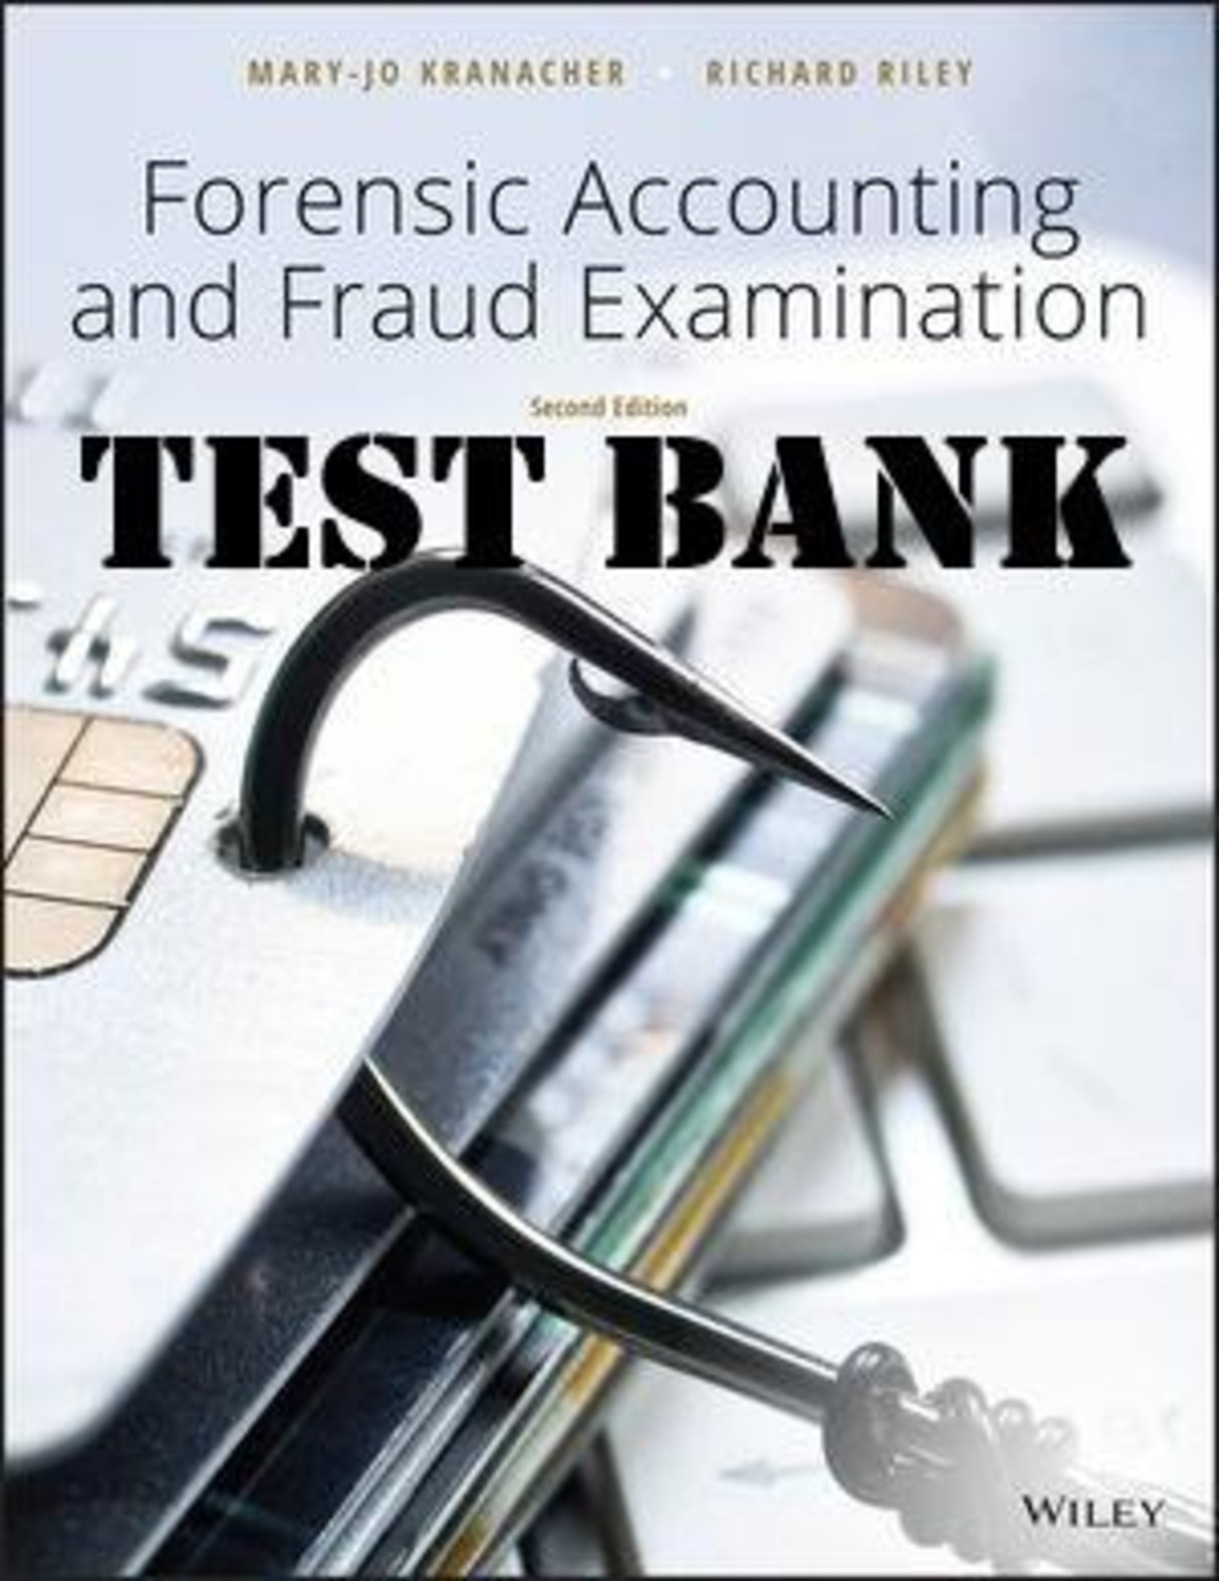 Test Bank for Forensic Accounting and Fraud Examination, 2nd Edition Mary-Jo Kranacher